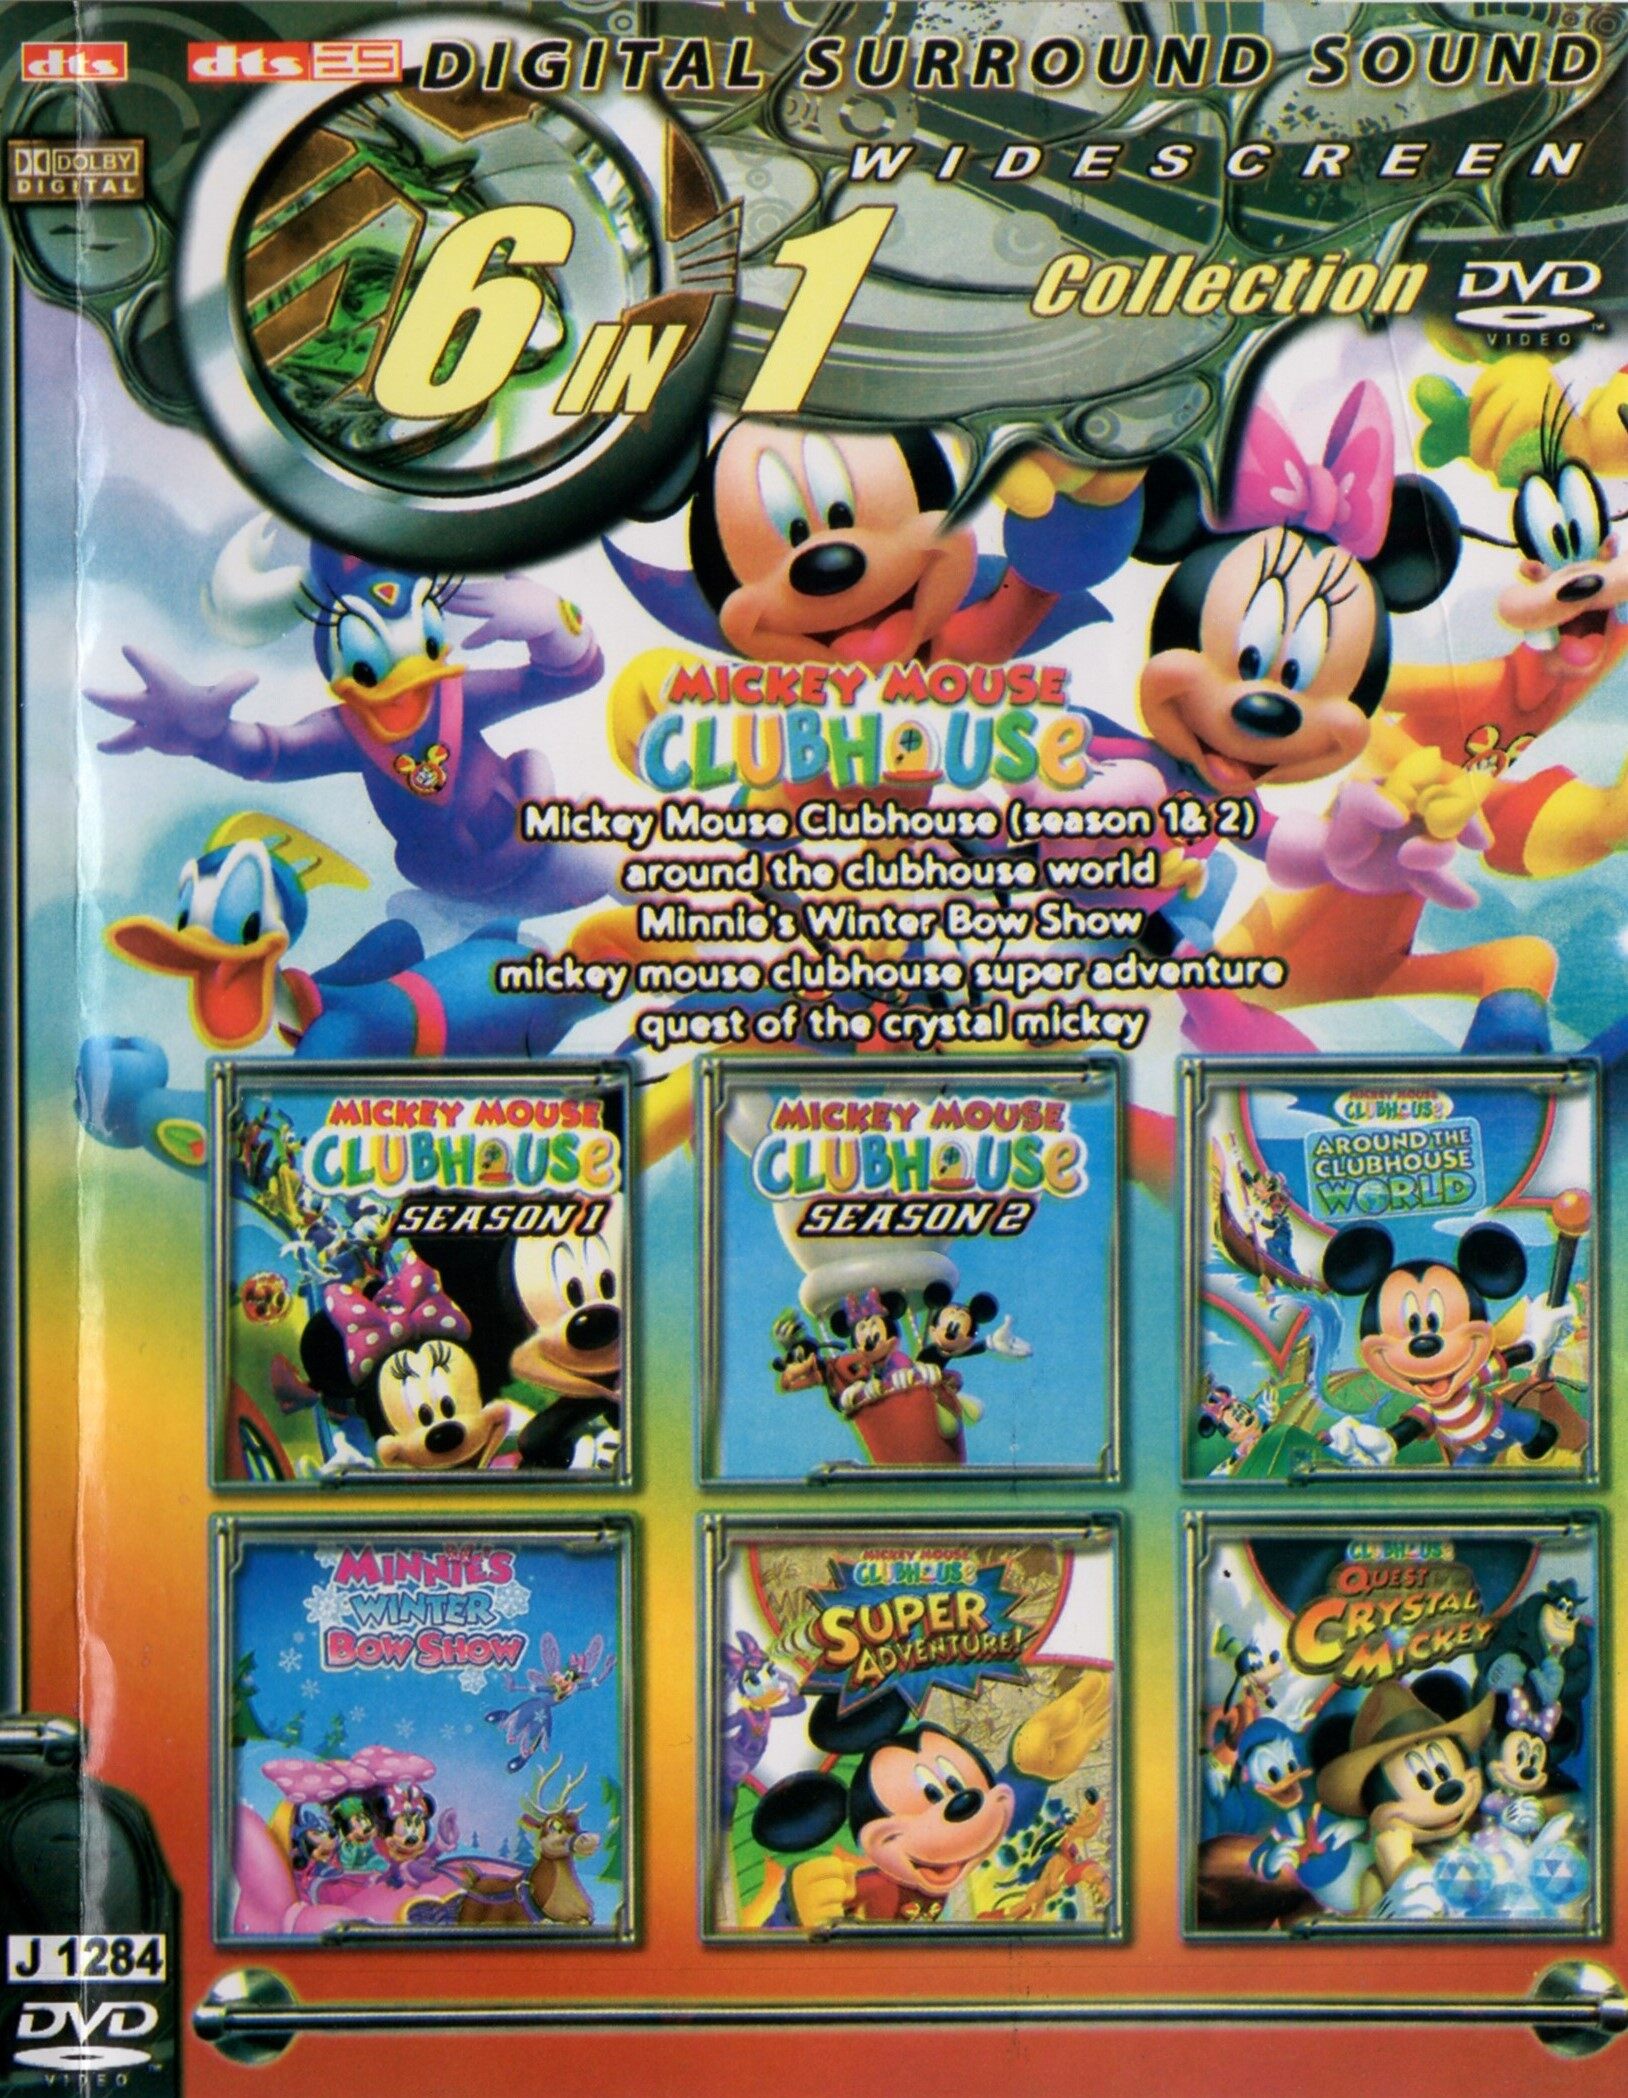 DVD English Cartoon Micky Mouse 6 In 1 Collection J 1284 - Movieland682786  | Lazada